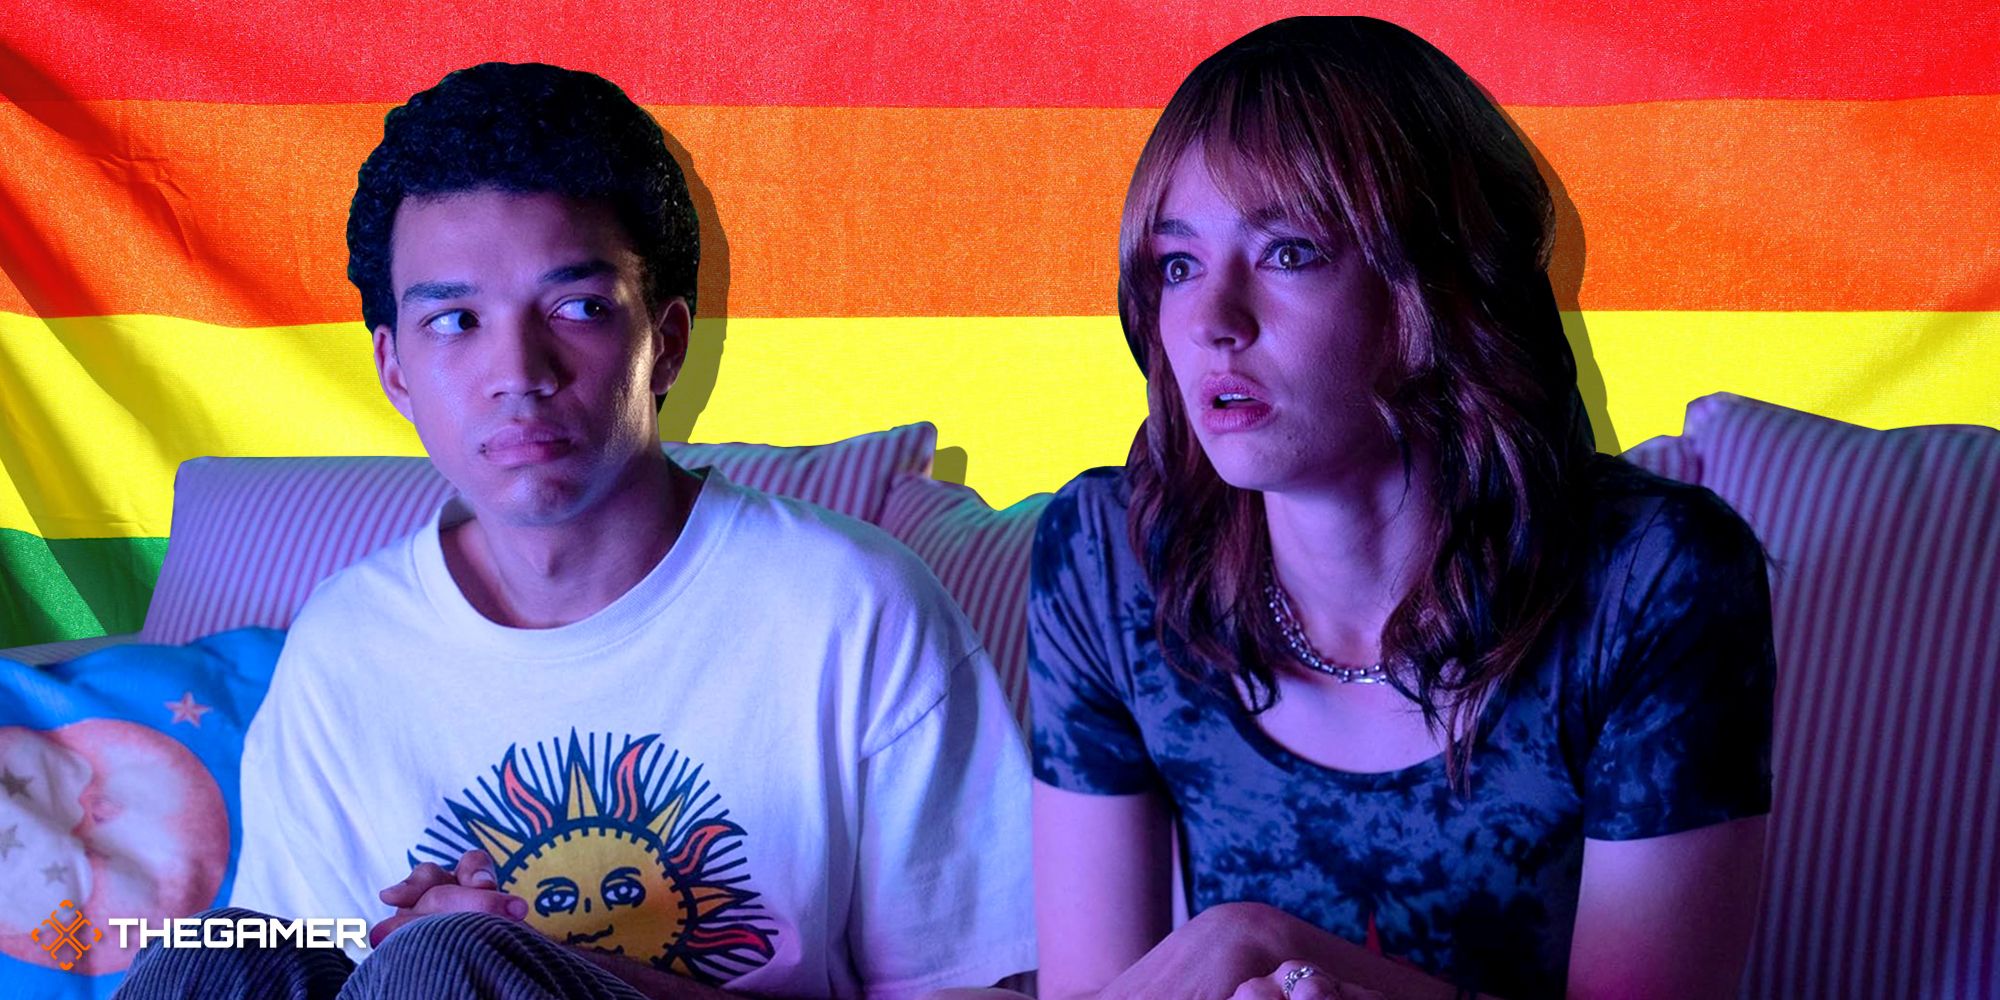 The characters from I Saw The TV Glow watching something on a couch, with a pride flag in the background.